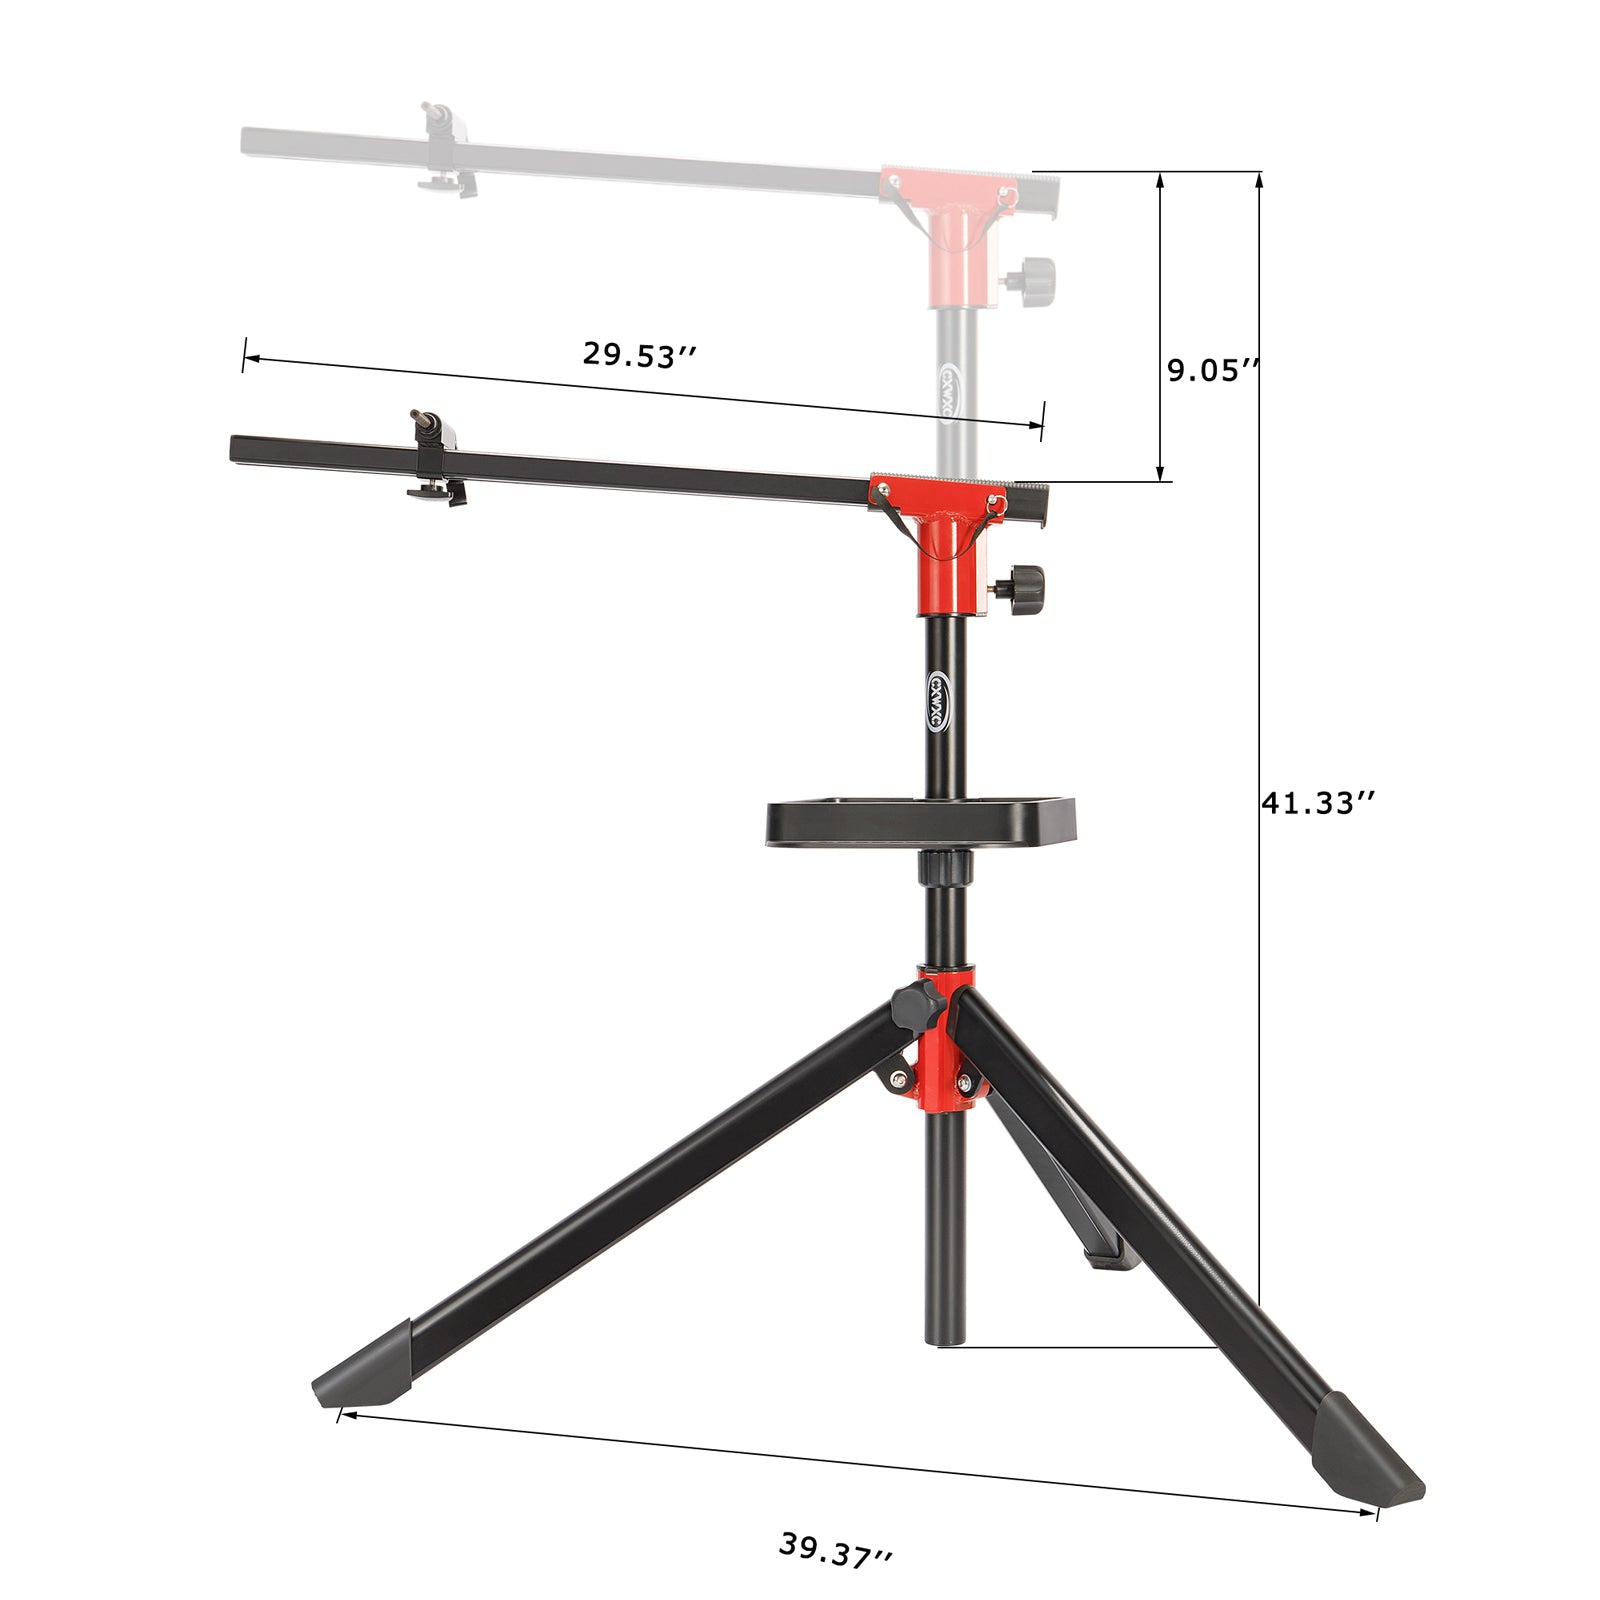 Bike Repair Stand (Max 55 Lbs) - Shop Home Portable Bicycle Workstand - Aluminum Alloy Bike Stand for Maintenance